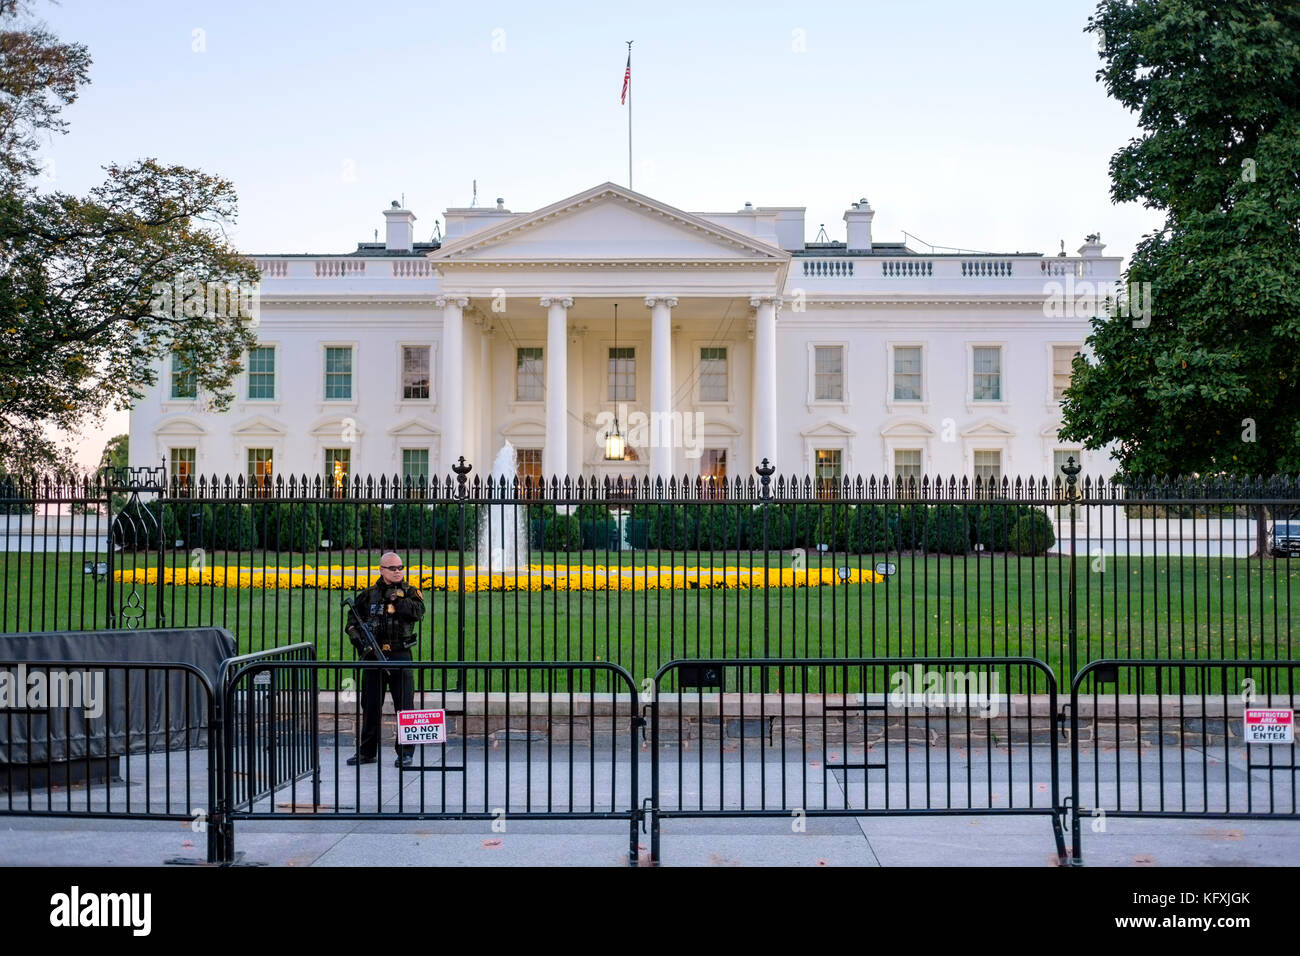 Armed American Secret Service agent standing behind a barricade in front of the White House in Washington, DC, United States of America, USA. Stock Photo